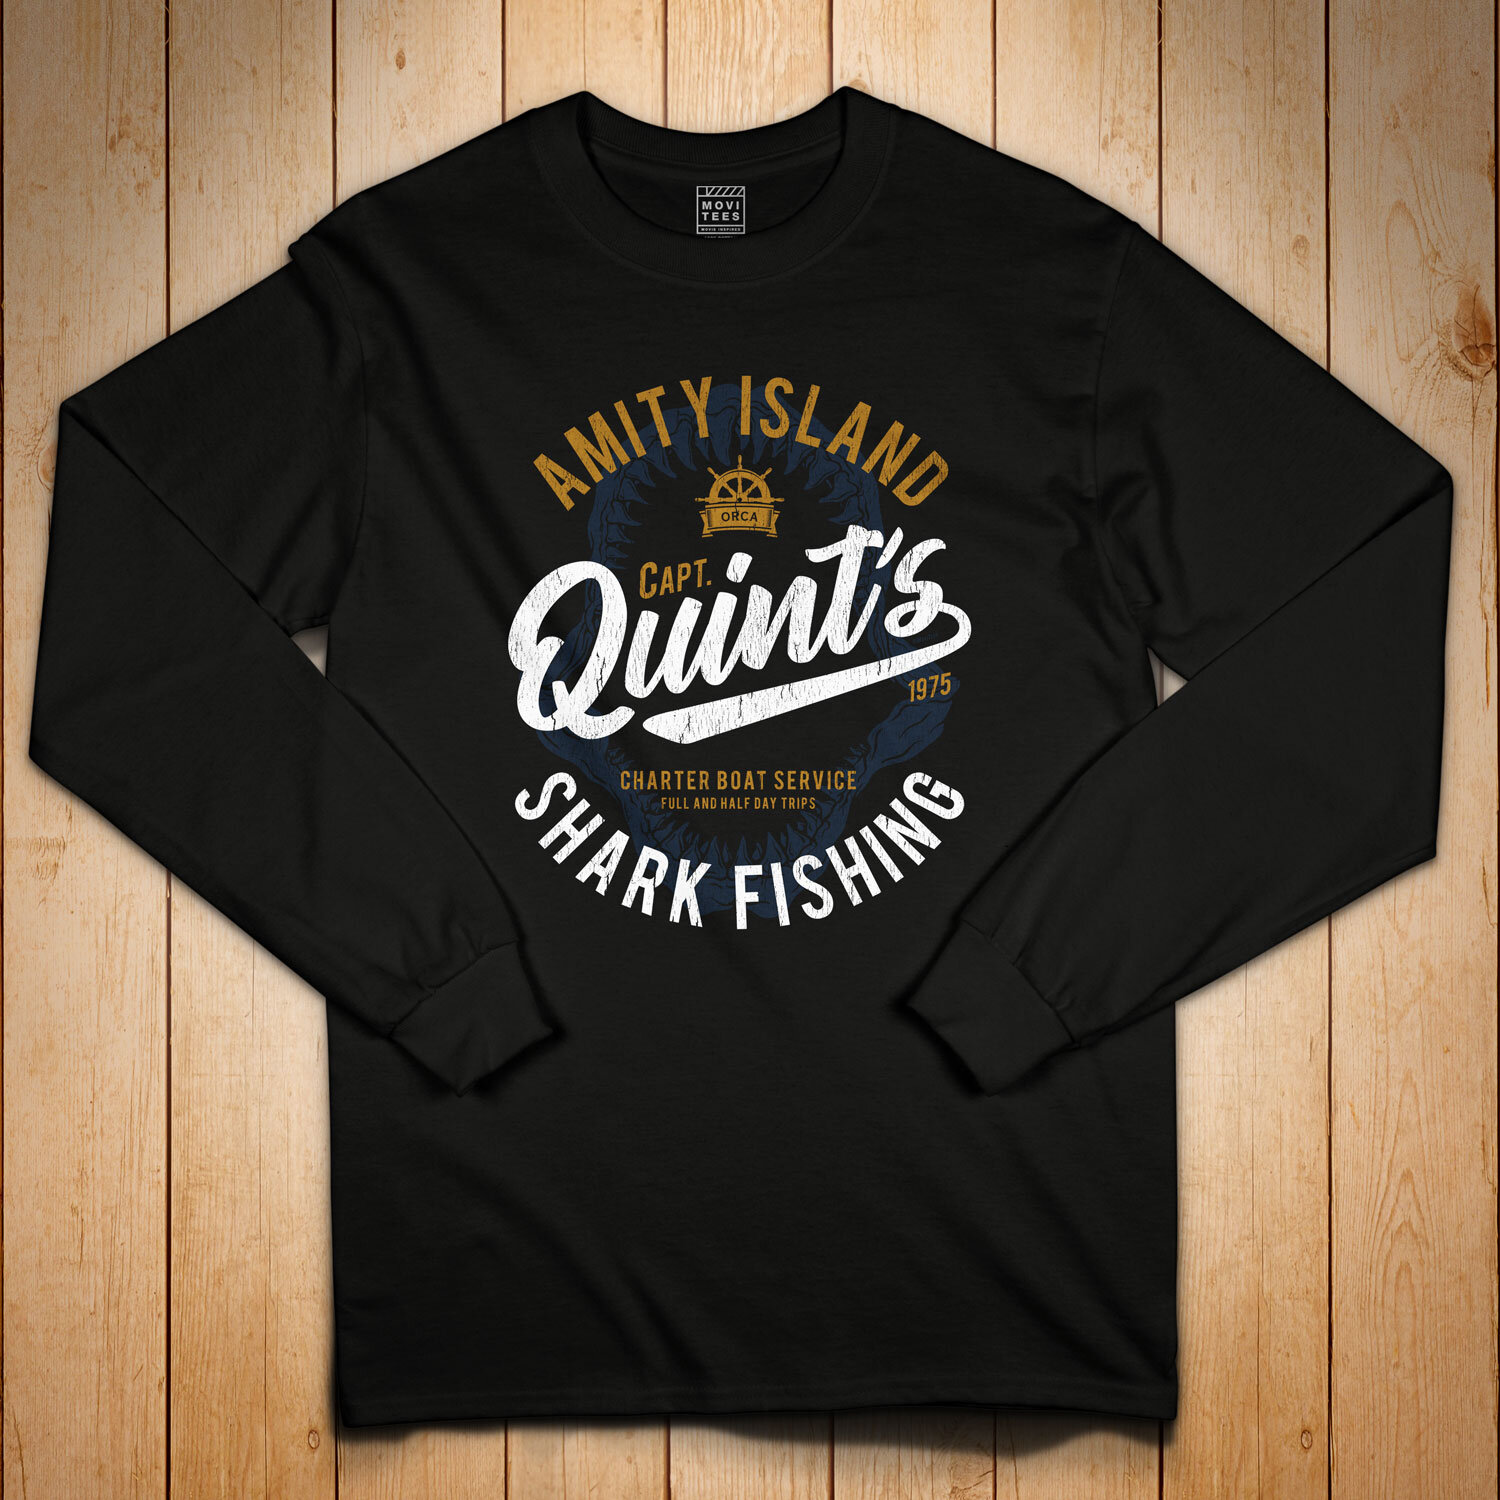 Quint's Shark Fishing T-Shirt inspired by Jaws - Long Sleeve